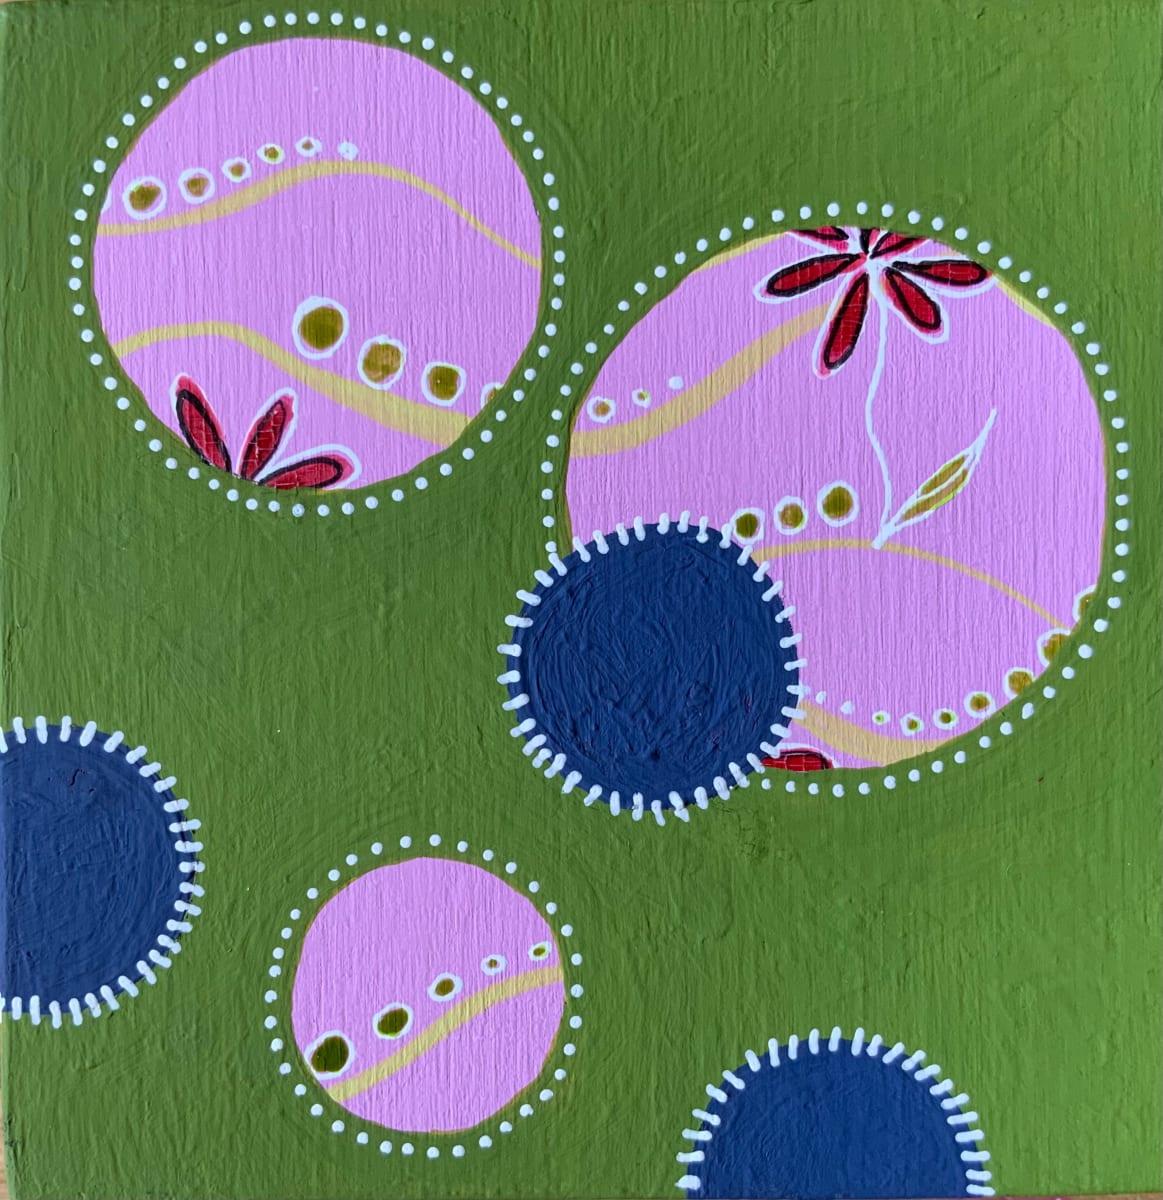 Dots 43, Olive + Pink Pattern & Navy  Image: Dots 43, Olive + Pink Pattern & Navy Painting